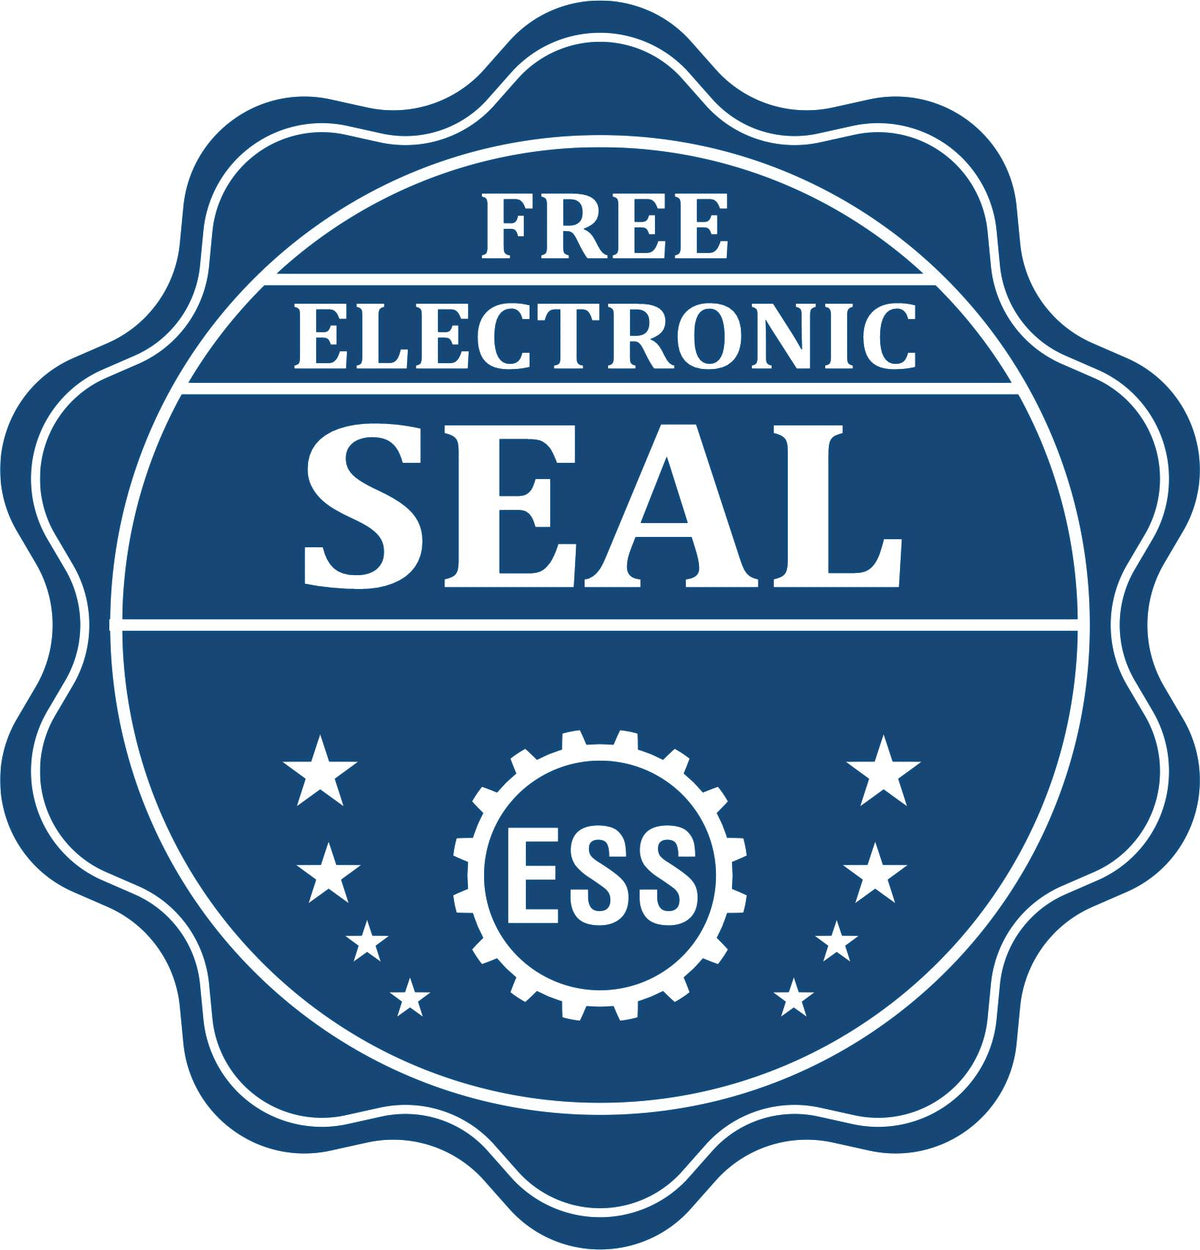 A badge showing a free electronic seal for the Hybrid Montana Land Surveyor Seal with stars and the ESS gear on the emblem.